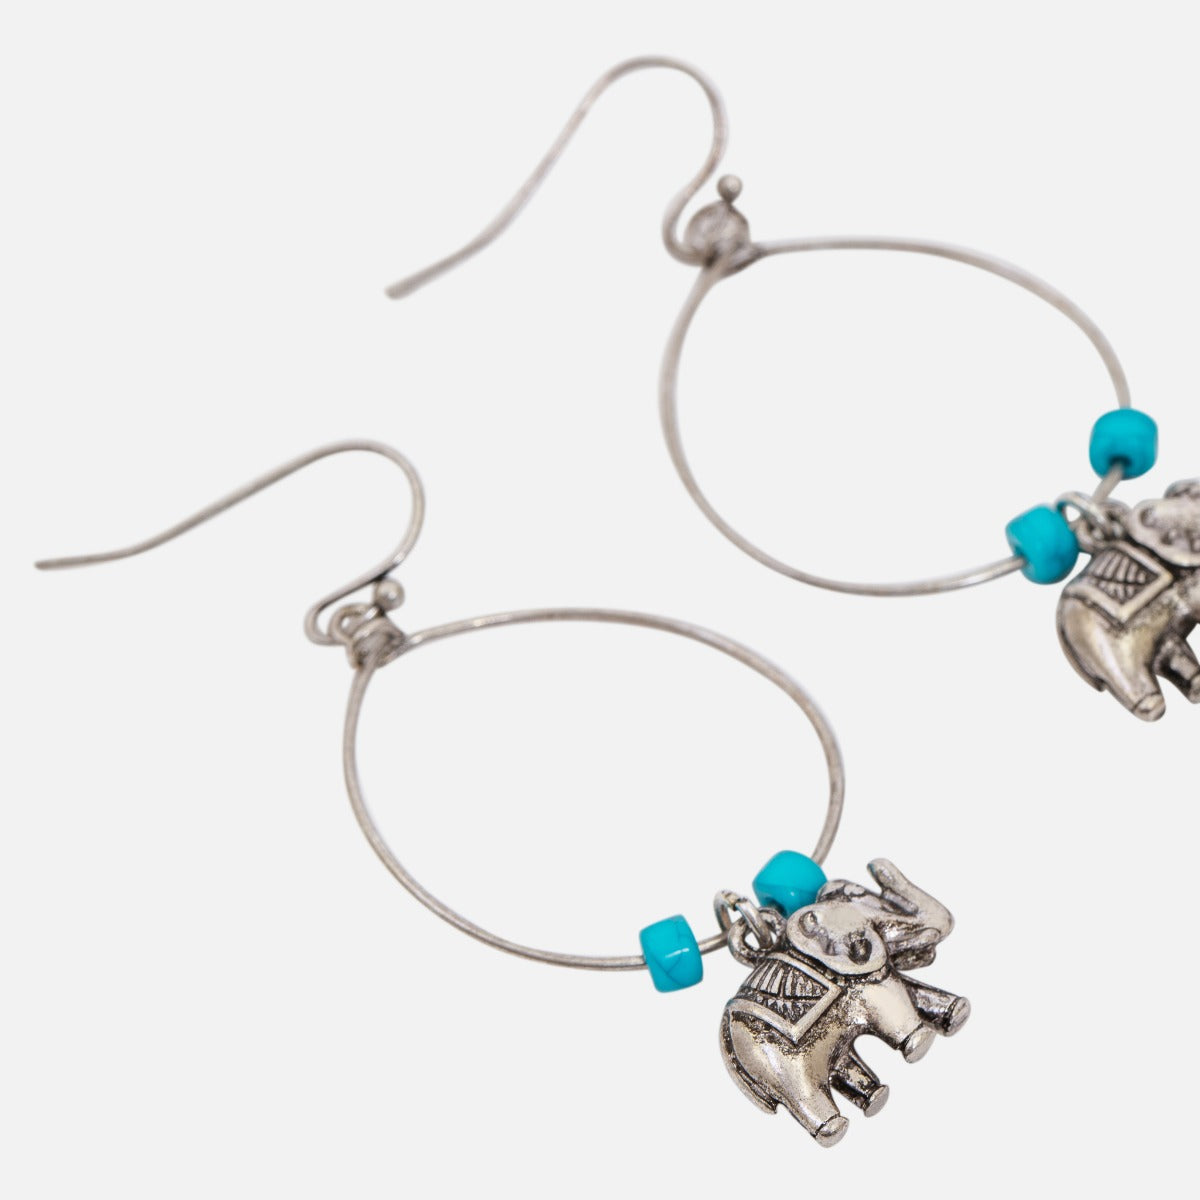 Delicate earrings with elephant charm